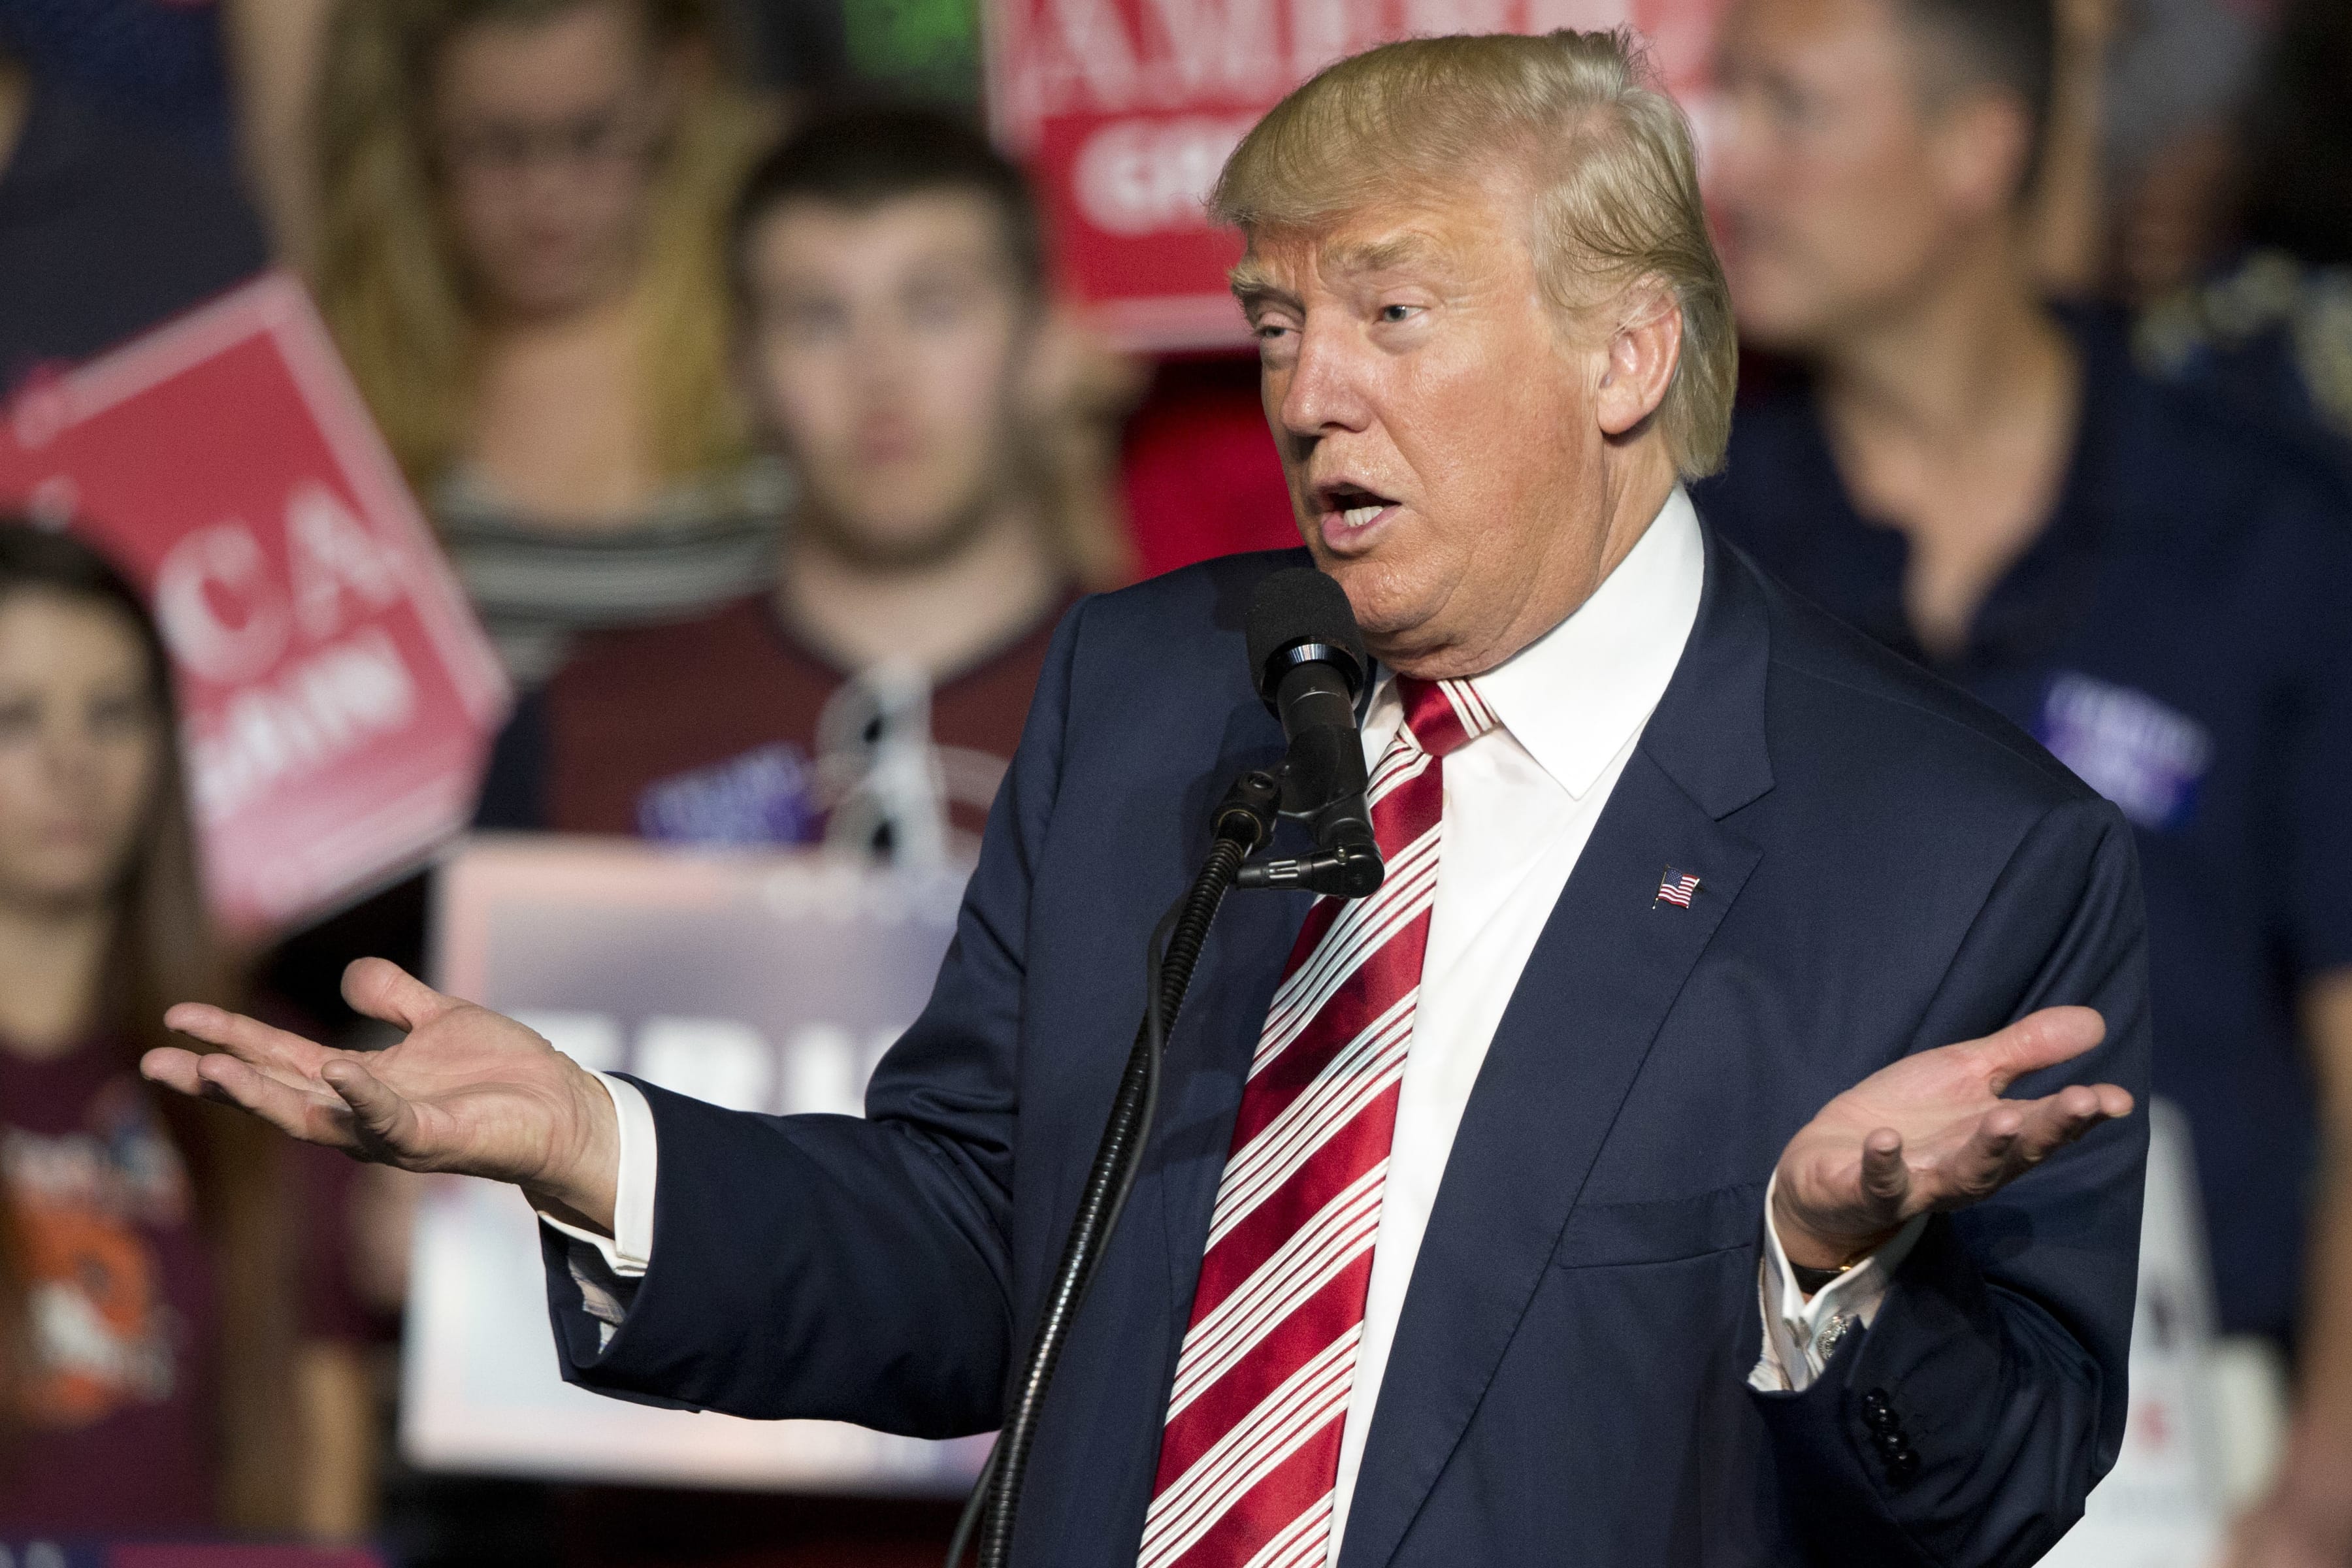 FILE – In this Sept. 24, 2016, file photo, Republican presidential candidate Donald Trump gestures during a rally in Roanoke, Va. Countless former Democrats in Ohio's blue-collar Mahoning Valley are transferring their adoration for late U.S. Rep. James A. Traficant Jr., D-Ohio, to Trump, while those who knew Traficant say similarities between him and Trump end at the populist bravado and outsized hair.